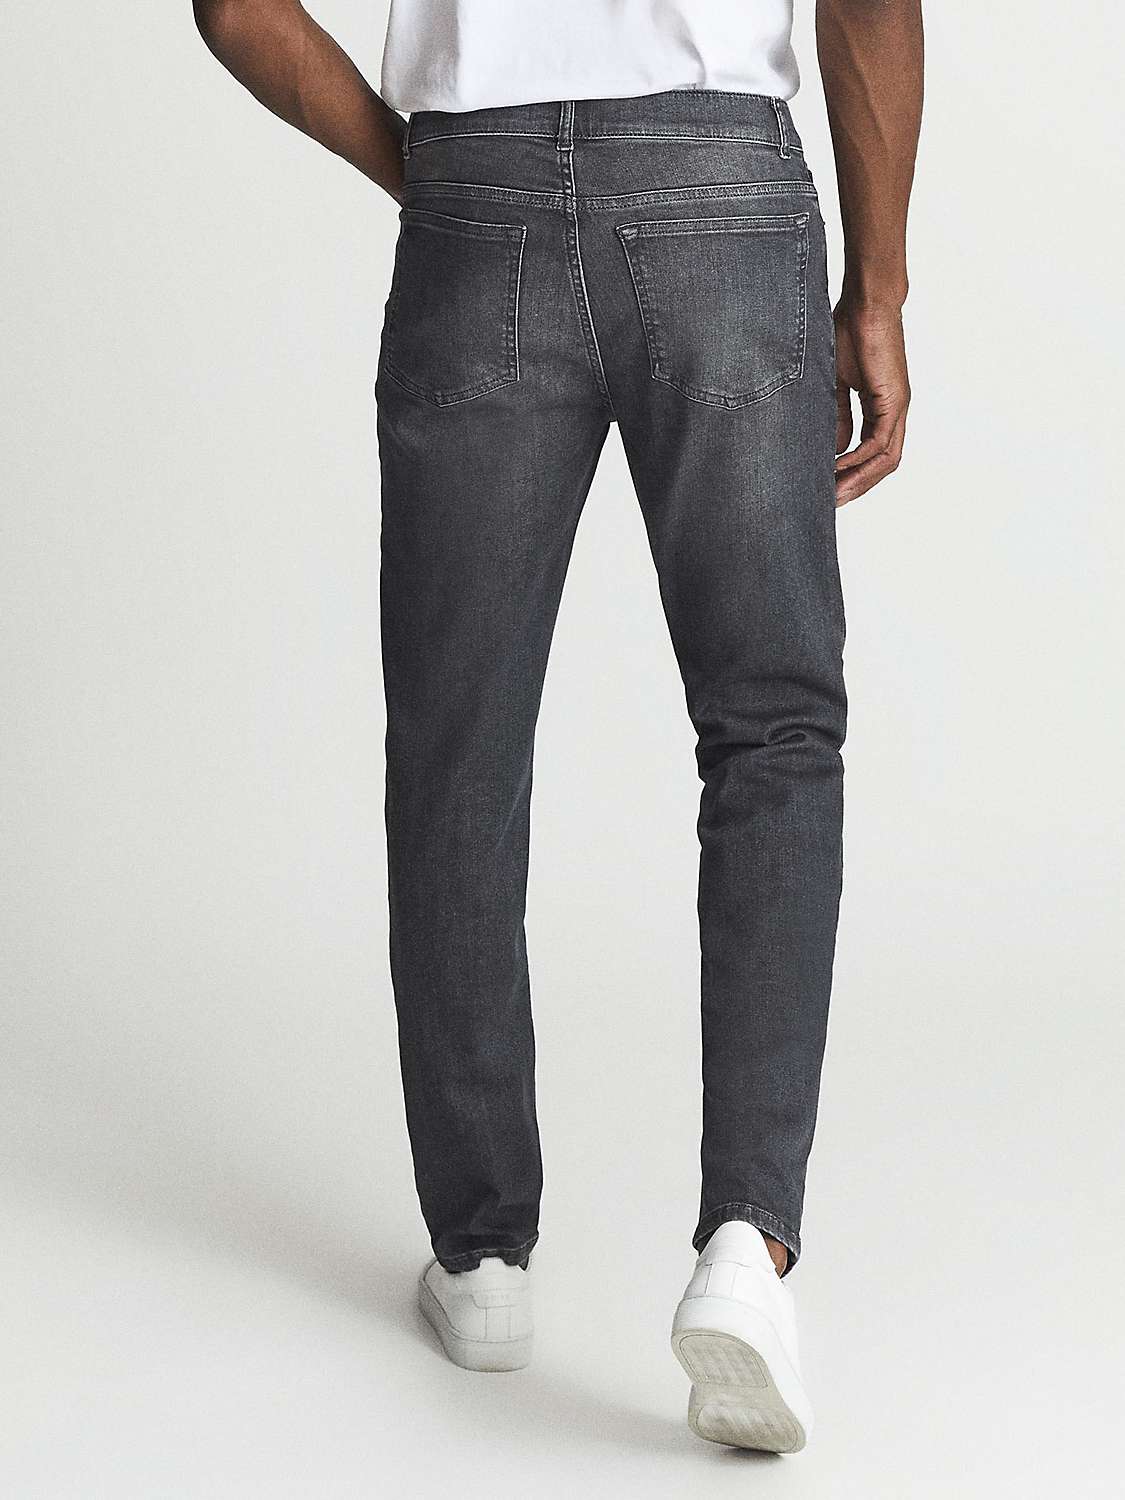 Buy Reiss Harry Slim Jeans, Washed Grey Online at johnlewis.com